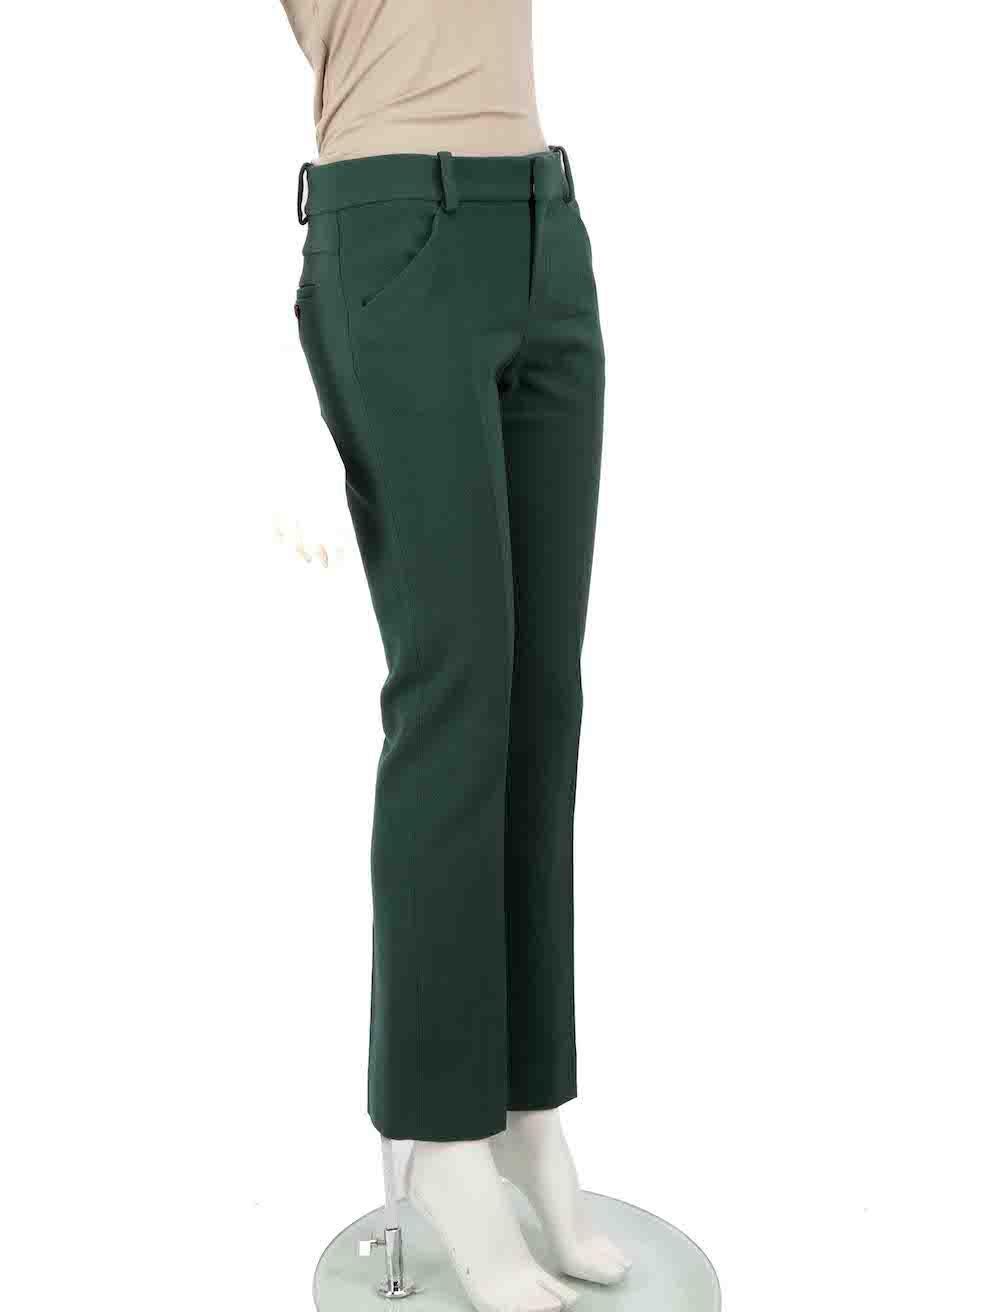 CONDITION is Very good. Minimal wear of trousers is evident. Minimal tarnishing to the clasps and small discolouration on the rear thigh area on this used Chloé designer resale item.
 
 
 
 Details
 
 
 Green
 
 Wool
 
 Trousers
 
 Straight leg
 
